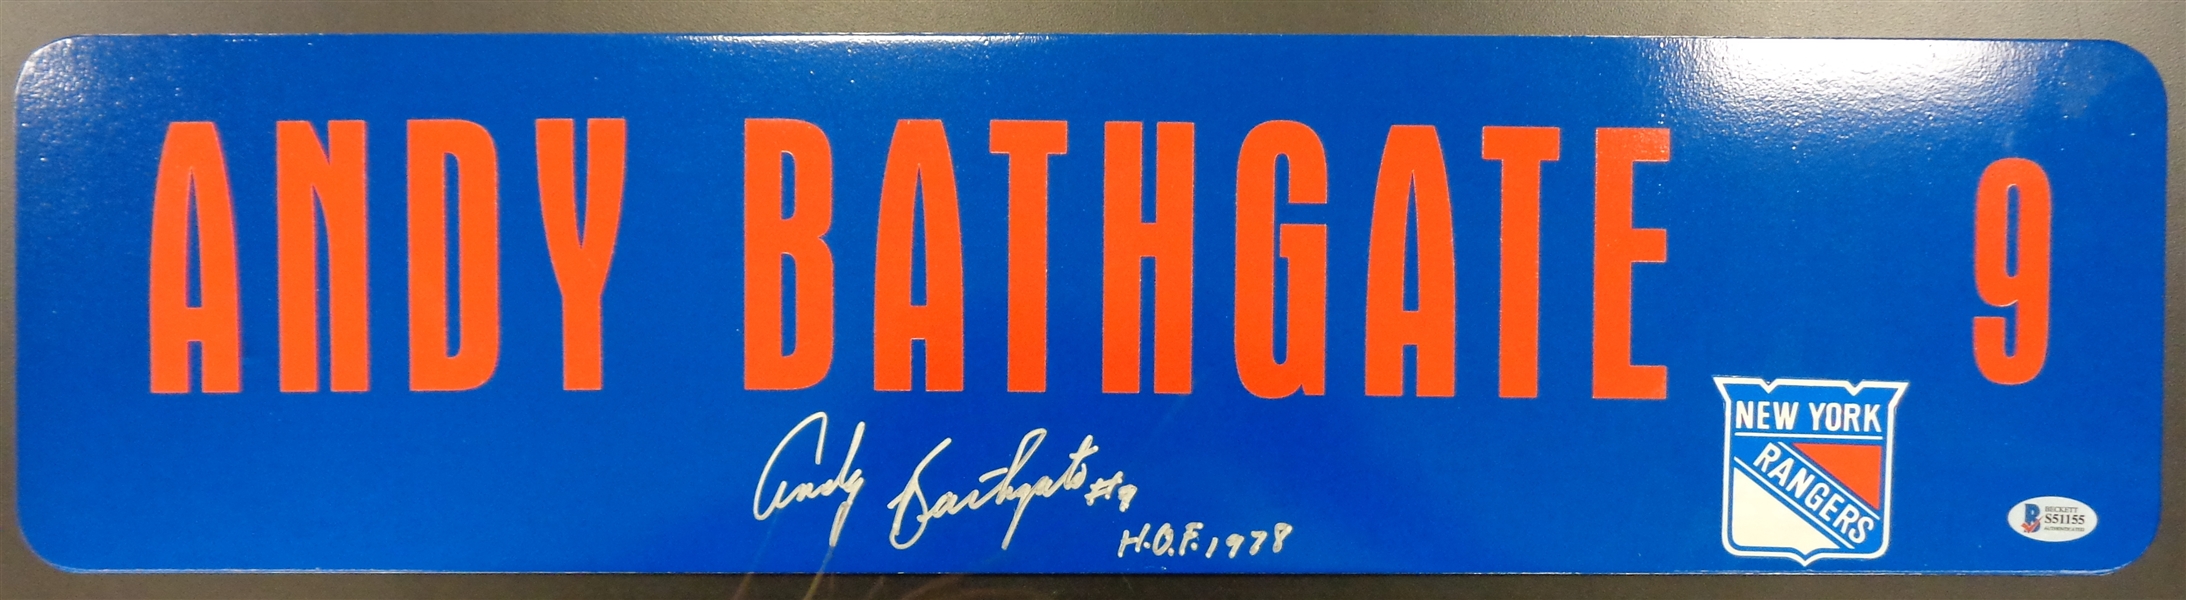 Andy Bathgate Autographed Custom 24x6 Metal Sign